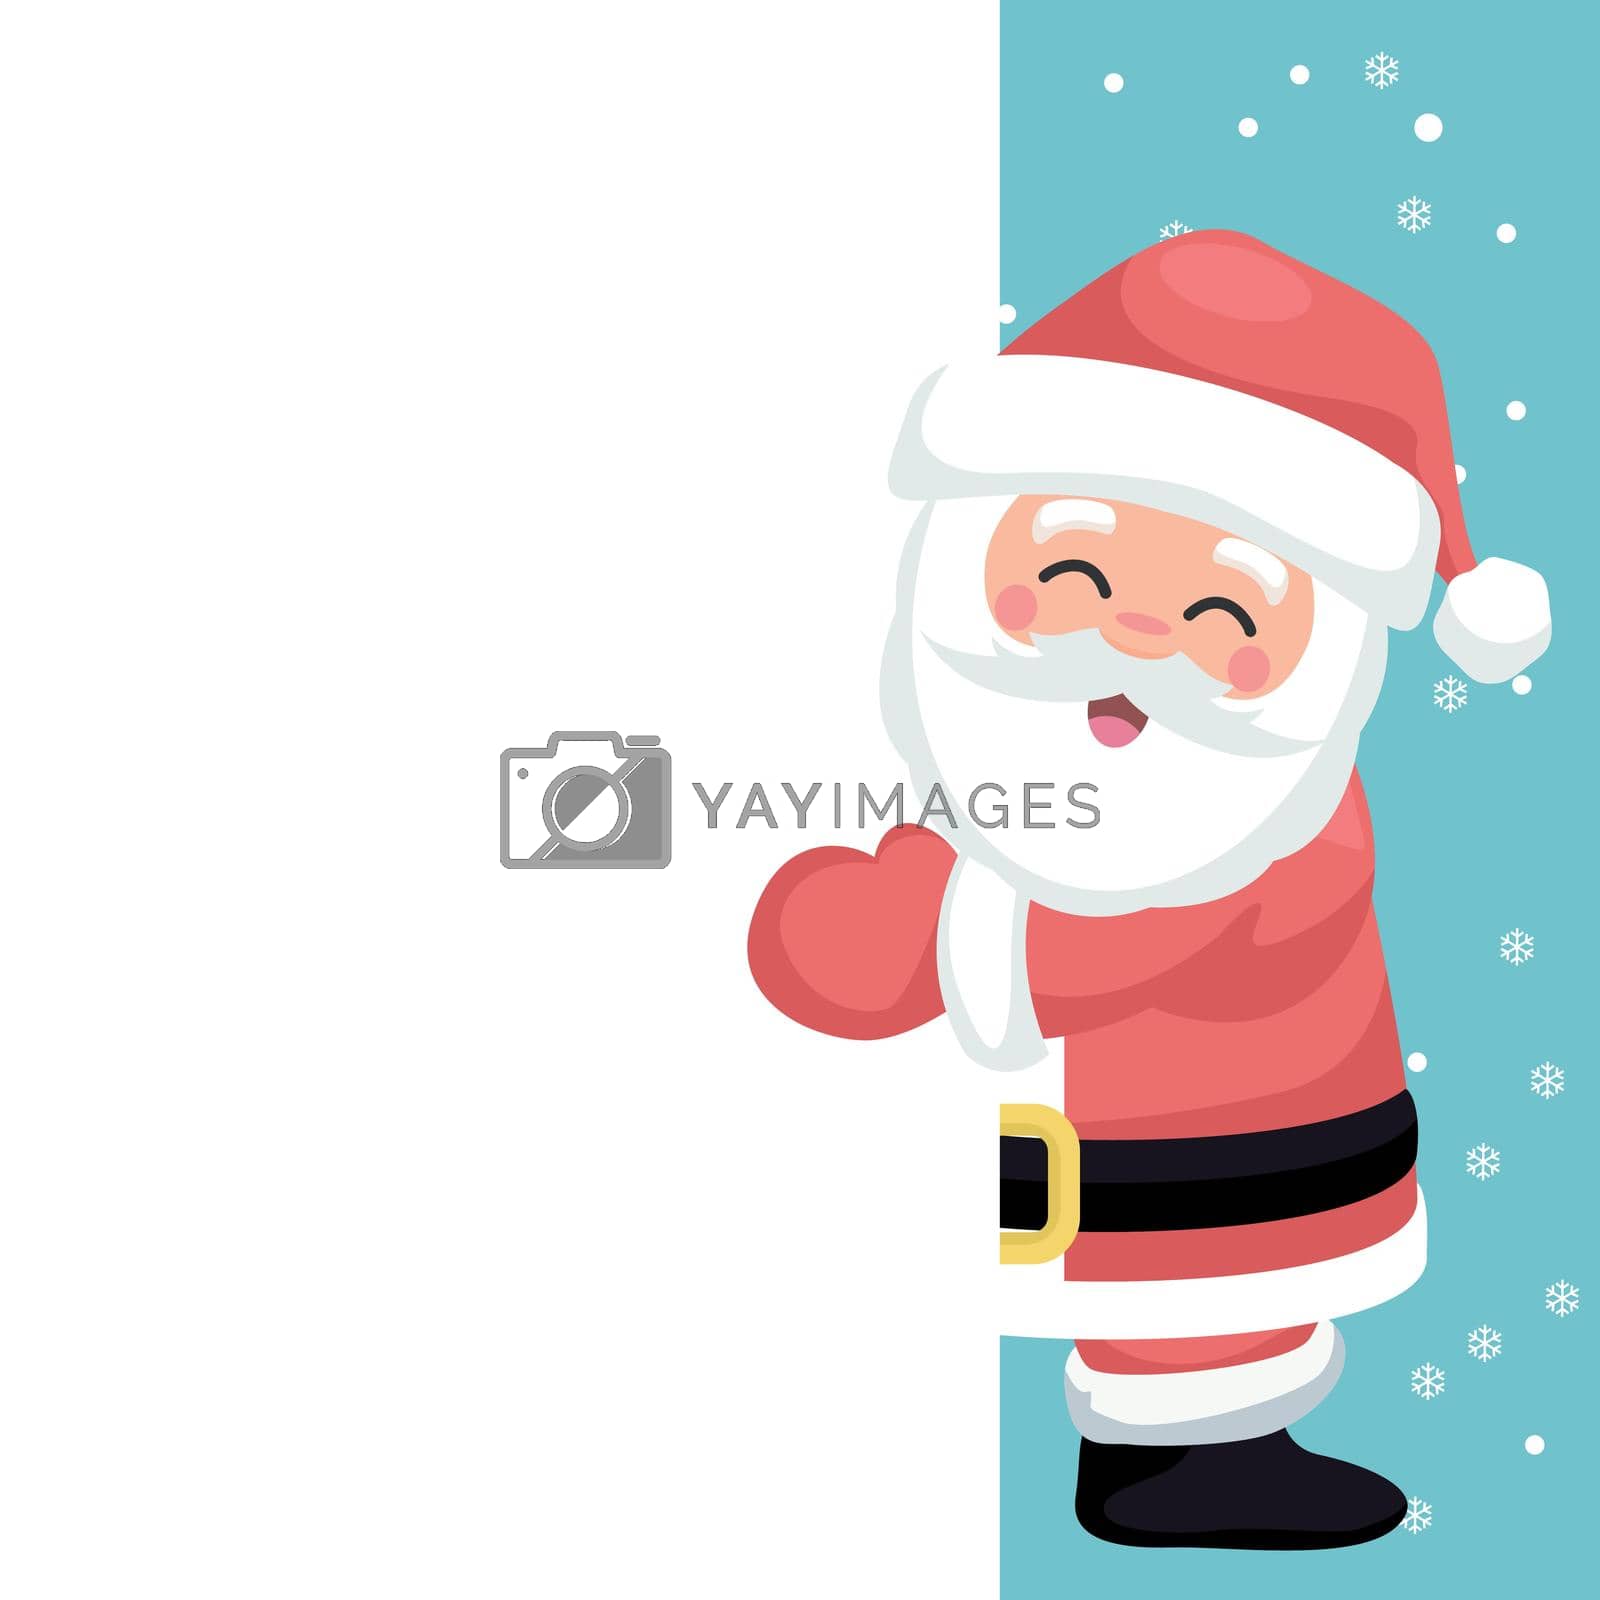 Royalty free image of Christmas card for dedication of happy Santa Claus by Ipajoel